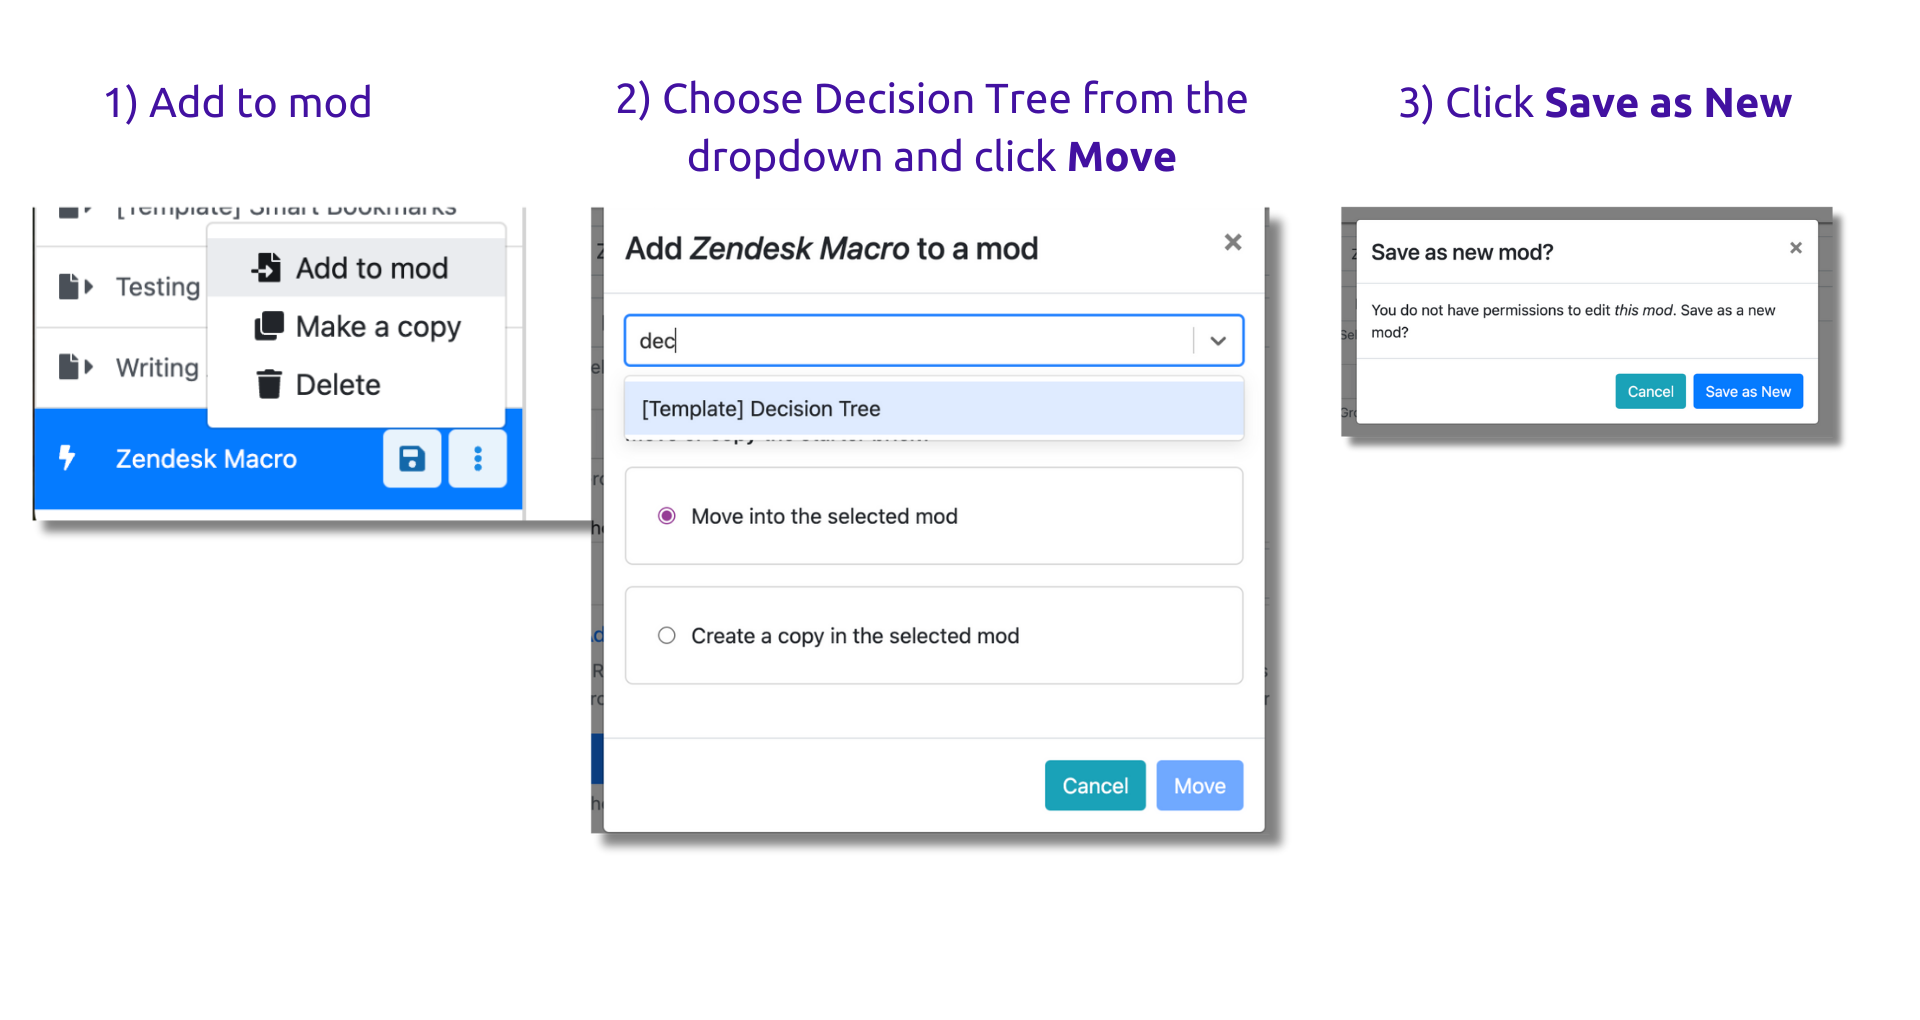 Launch a decision tree with a Zendesk macro